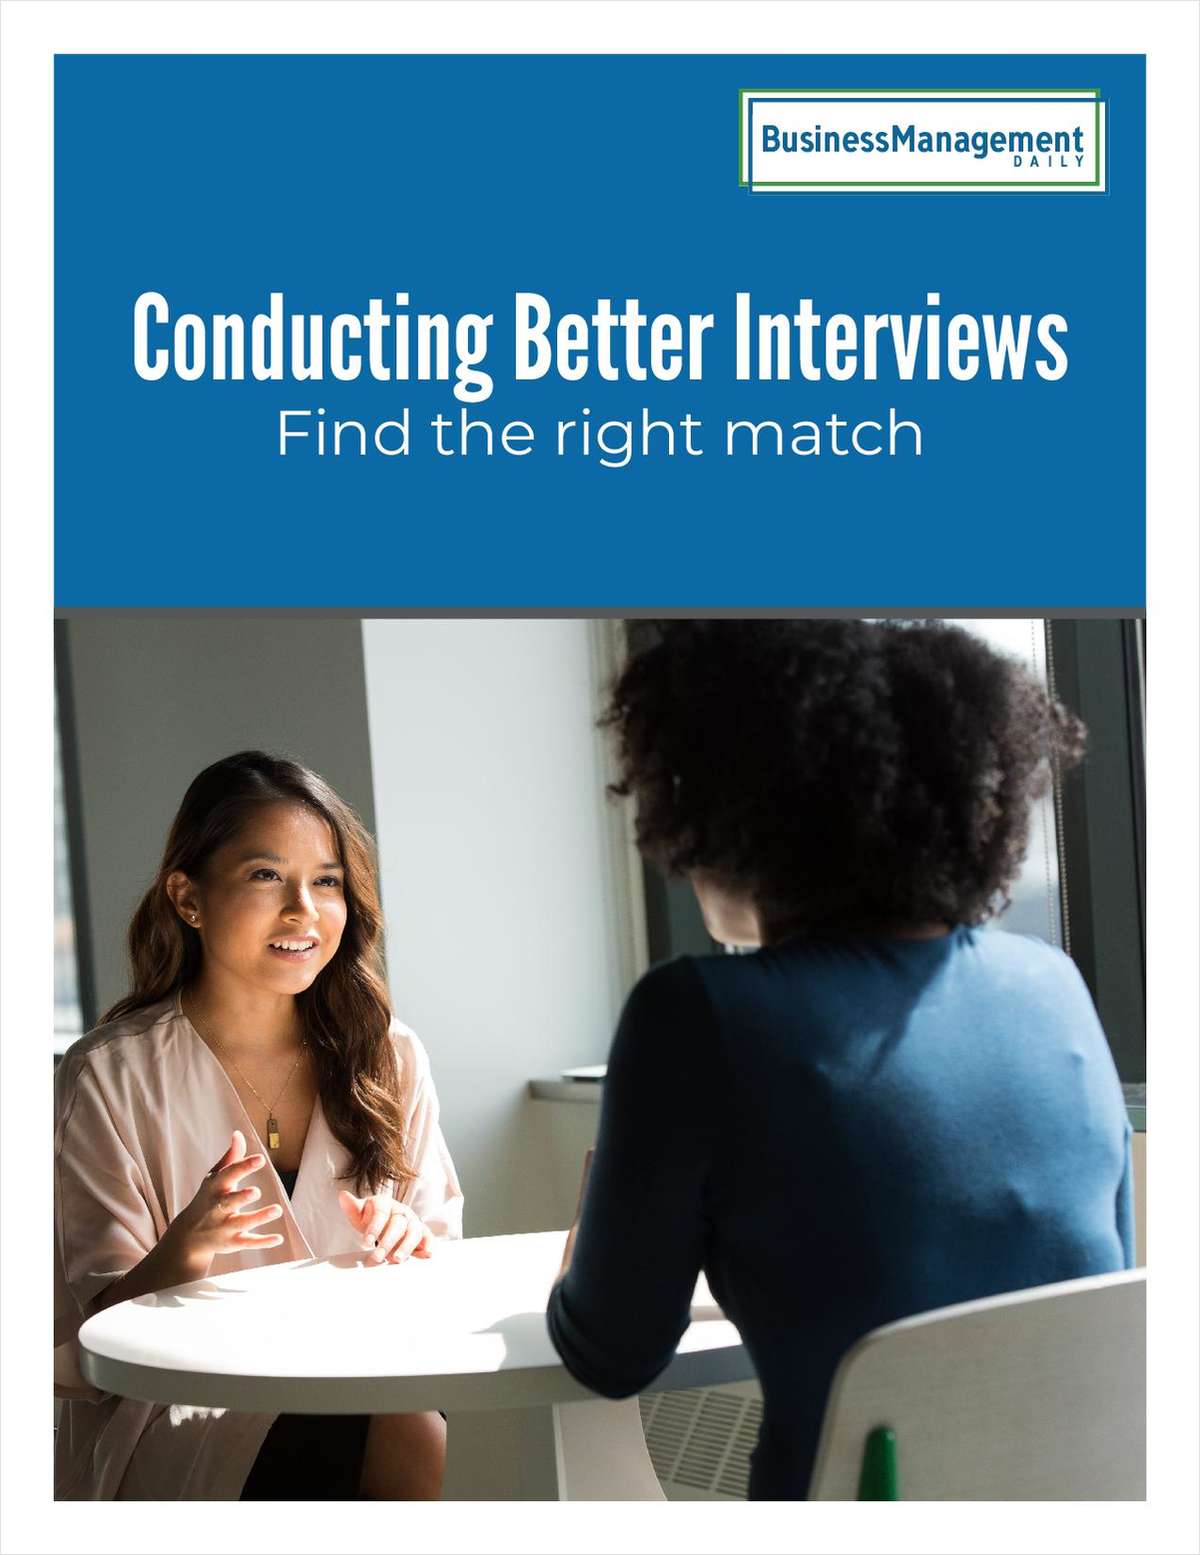 Conducting Better Interviews: Find the right match